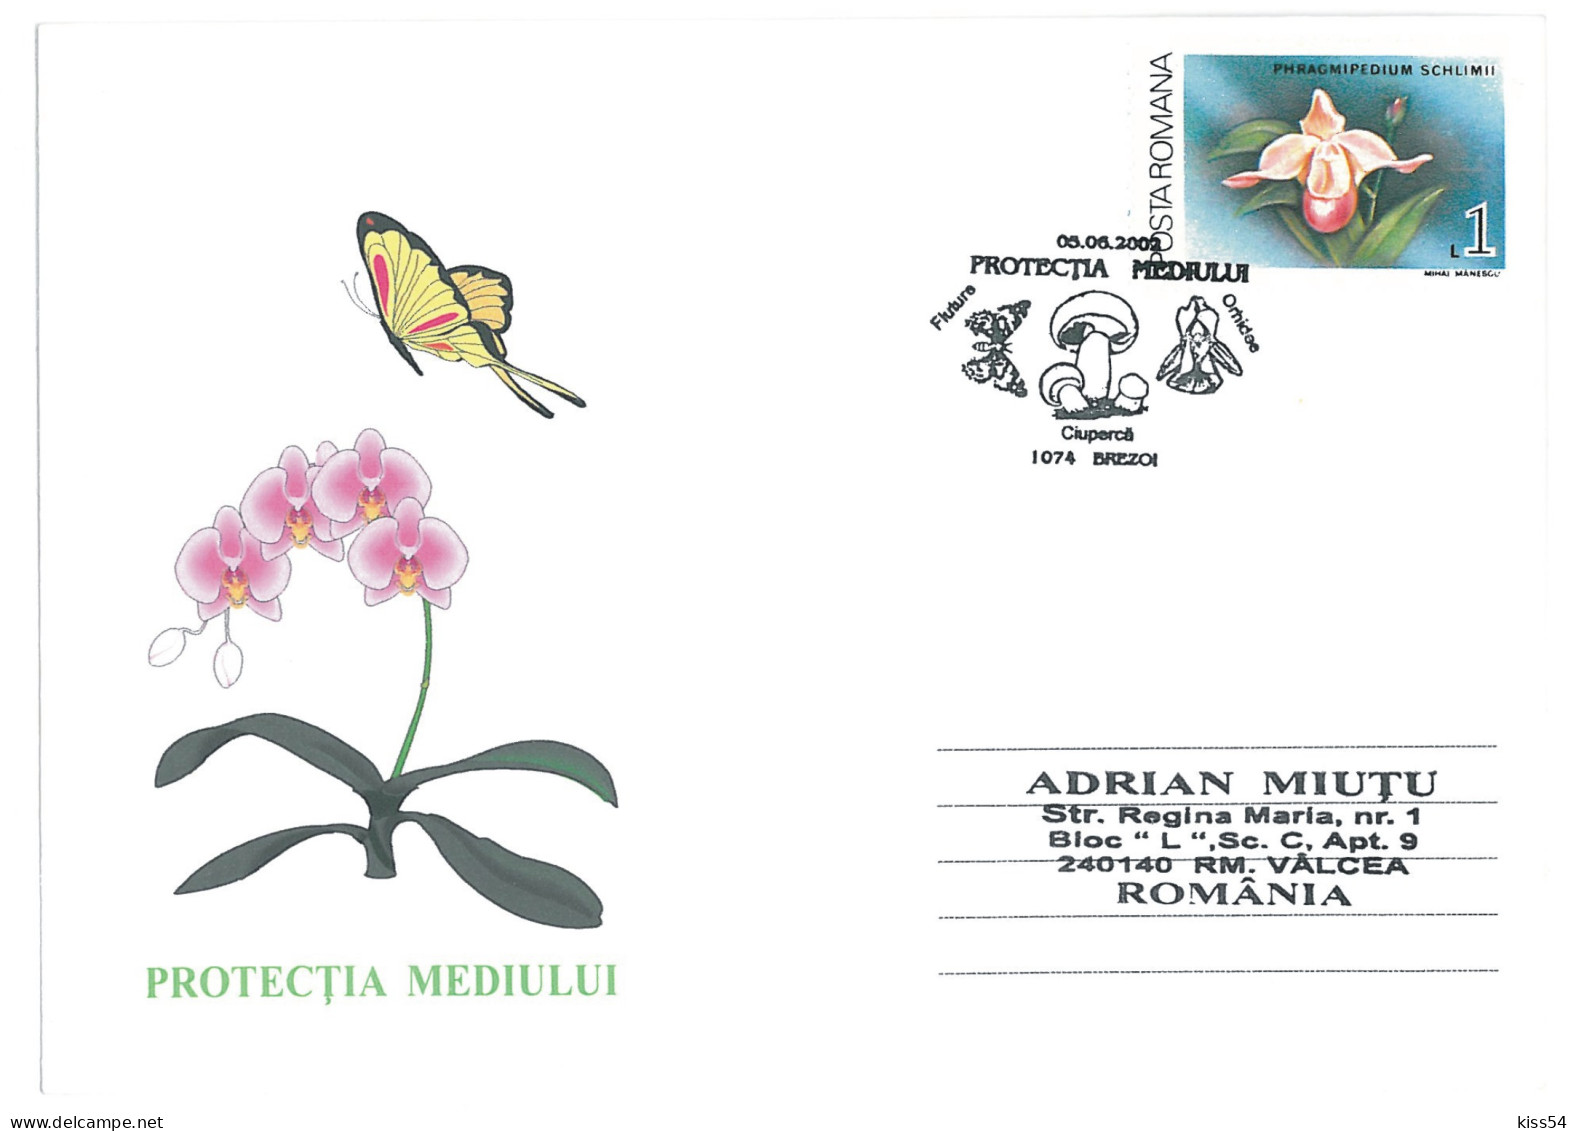 COV 22 - 1718, ORCHIDS, Environmental Protection, Romania - Cover - Used - 2002 - Maximum Cards & Covers